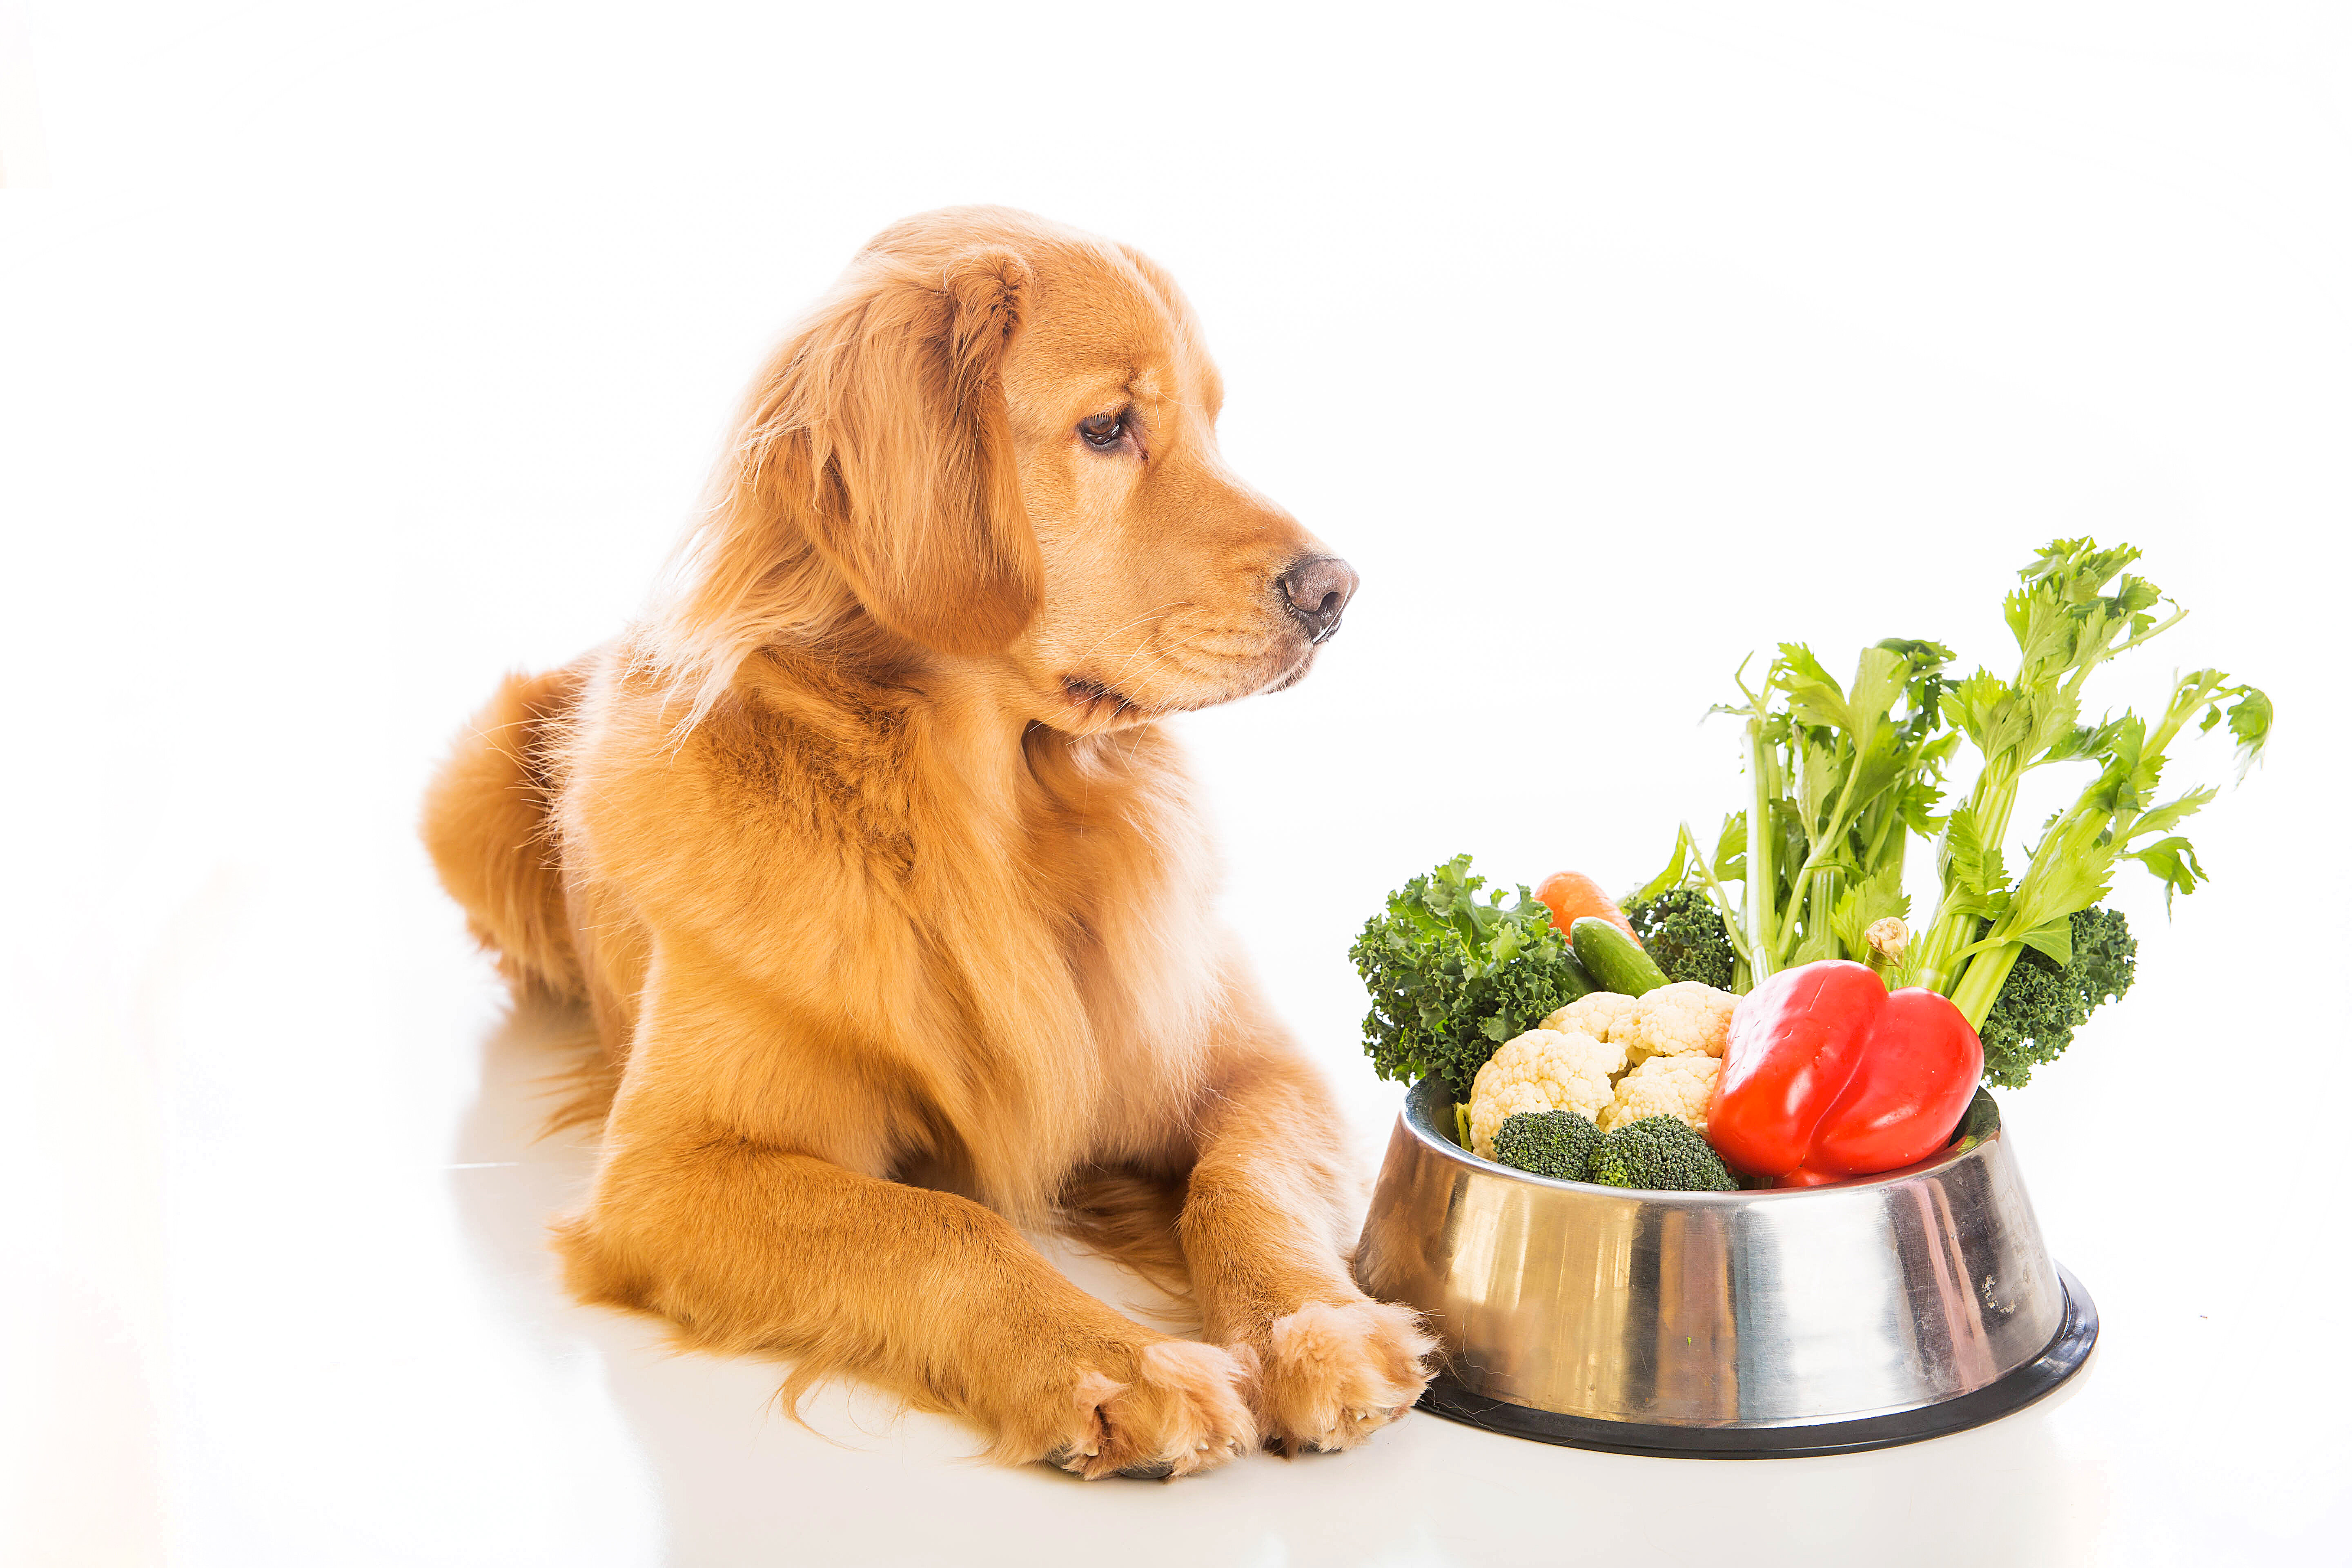 dog staring at food plate full of vegetables